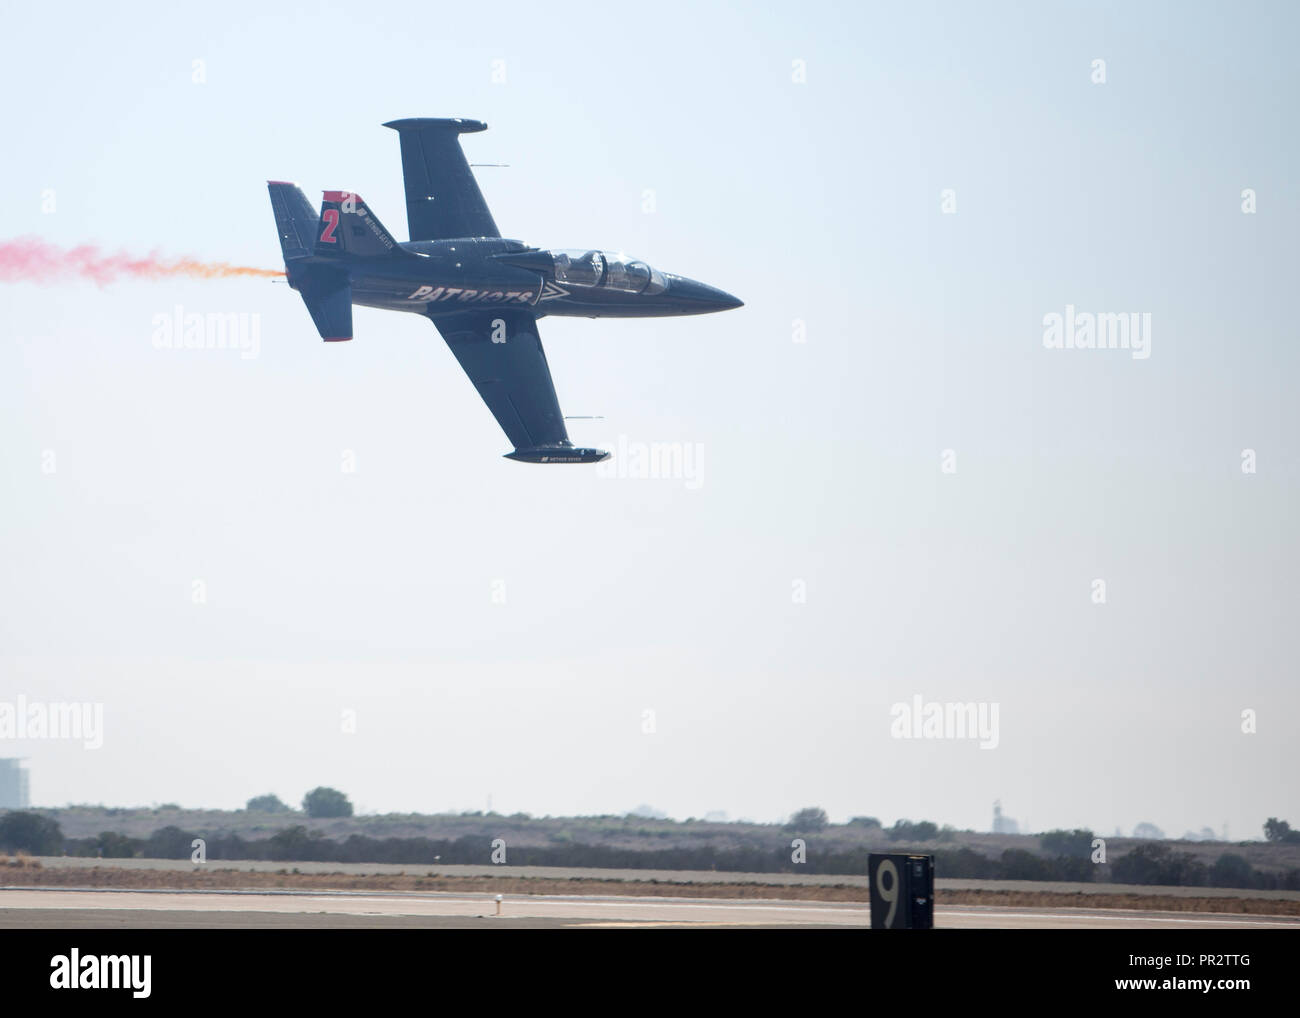 The Patriots Jet Team performs a 26-minute aerobatic flying routine in their aircraft, the L-39 Albatross, during the 2018 Marine Corps Air Station Miramar Air Show at MCAS Miramar, Calif., Sept. 28. This year's air show honors '100 years of women in the Marine Corps' by featuring several performances and displays that highlight accomplishments and milestones women made since the first female enlistee, Opha May Johnson, who joined the service in 1918.(U.S. Marine Corps photo by Lance Cpl. Samuel Ruiz) Stock Photo